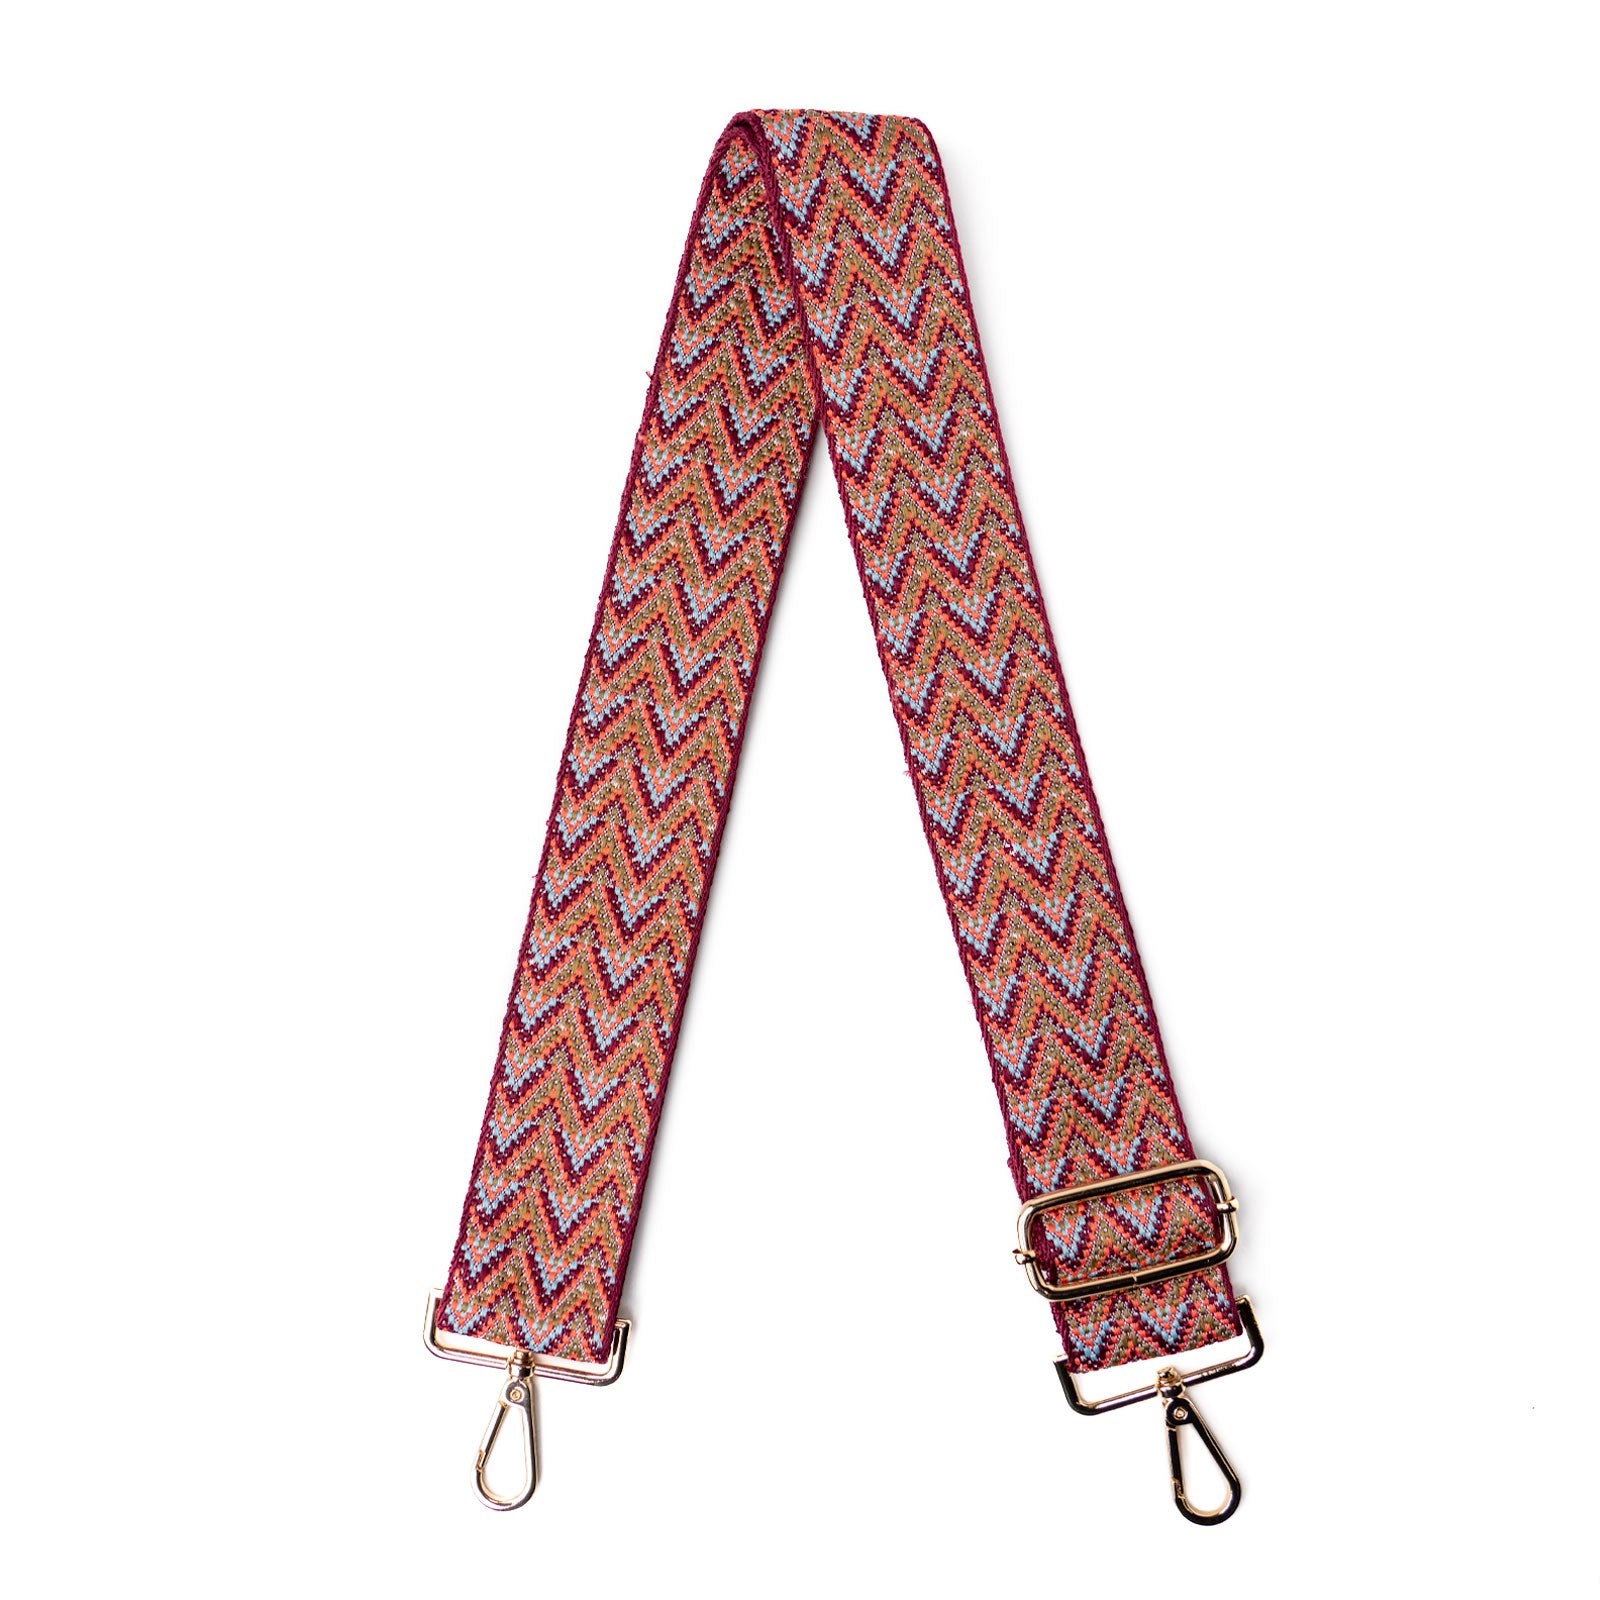 Kedzie Replacement Bag Straps - Rosewood Collection, Sedona